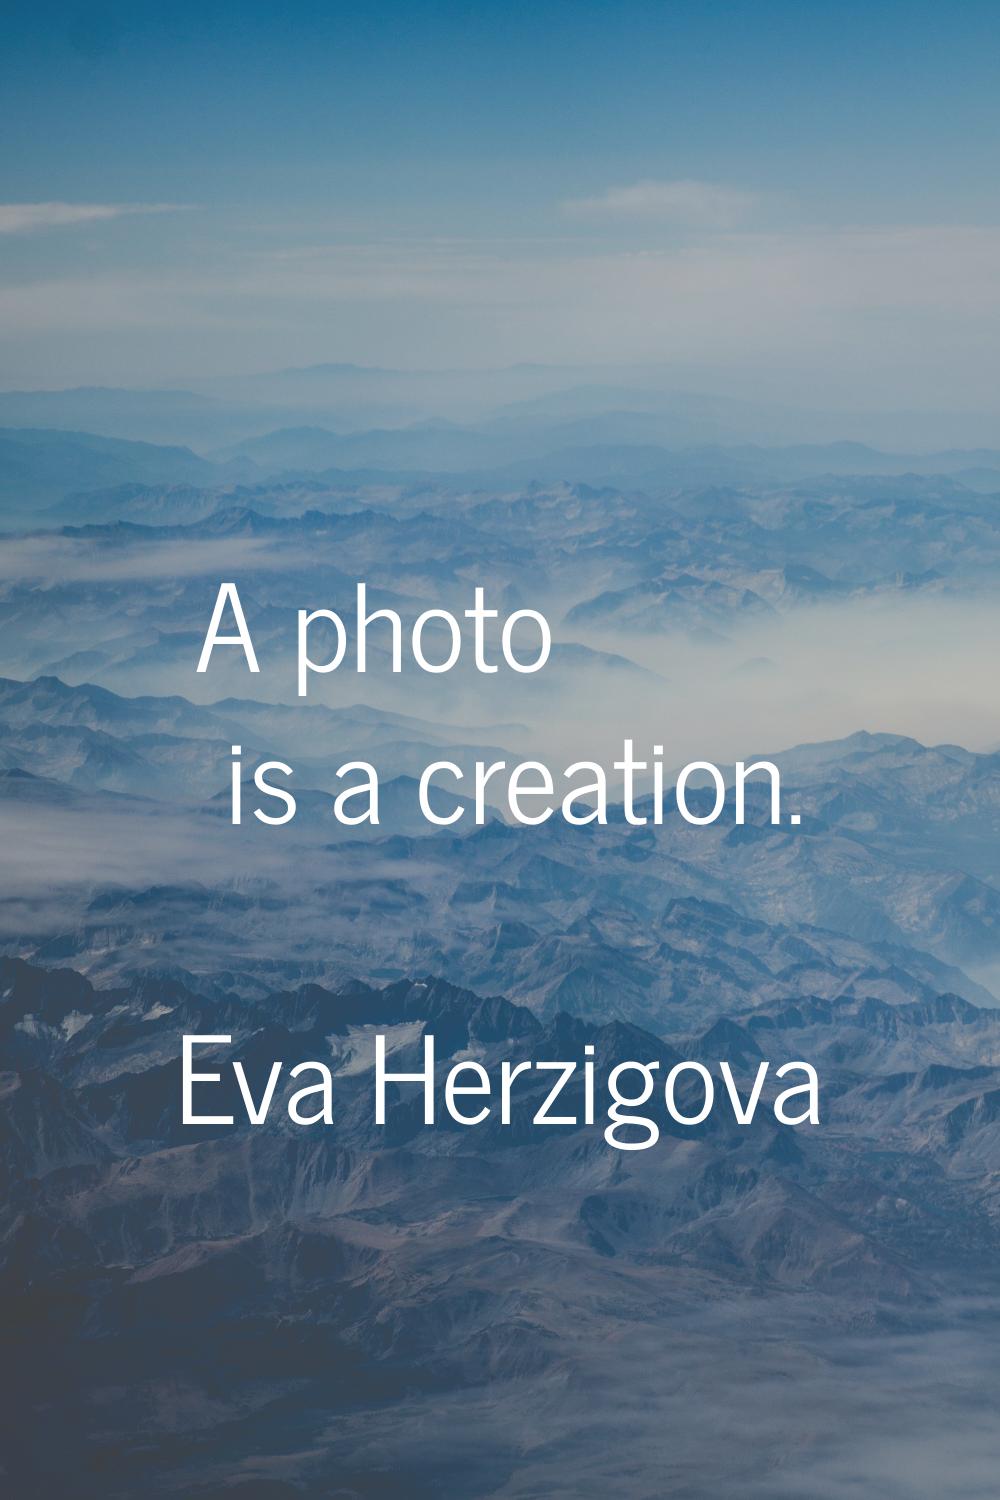 A photo is a creation.